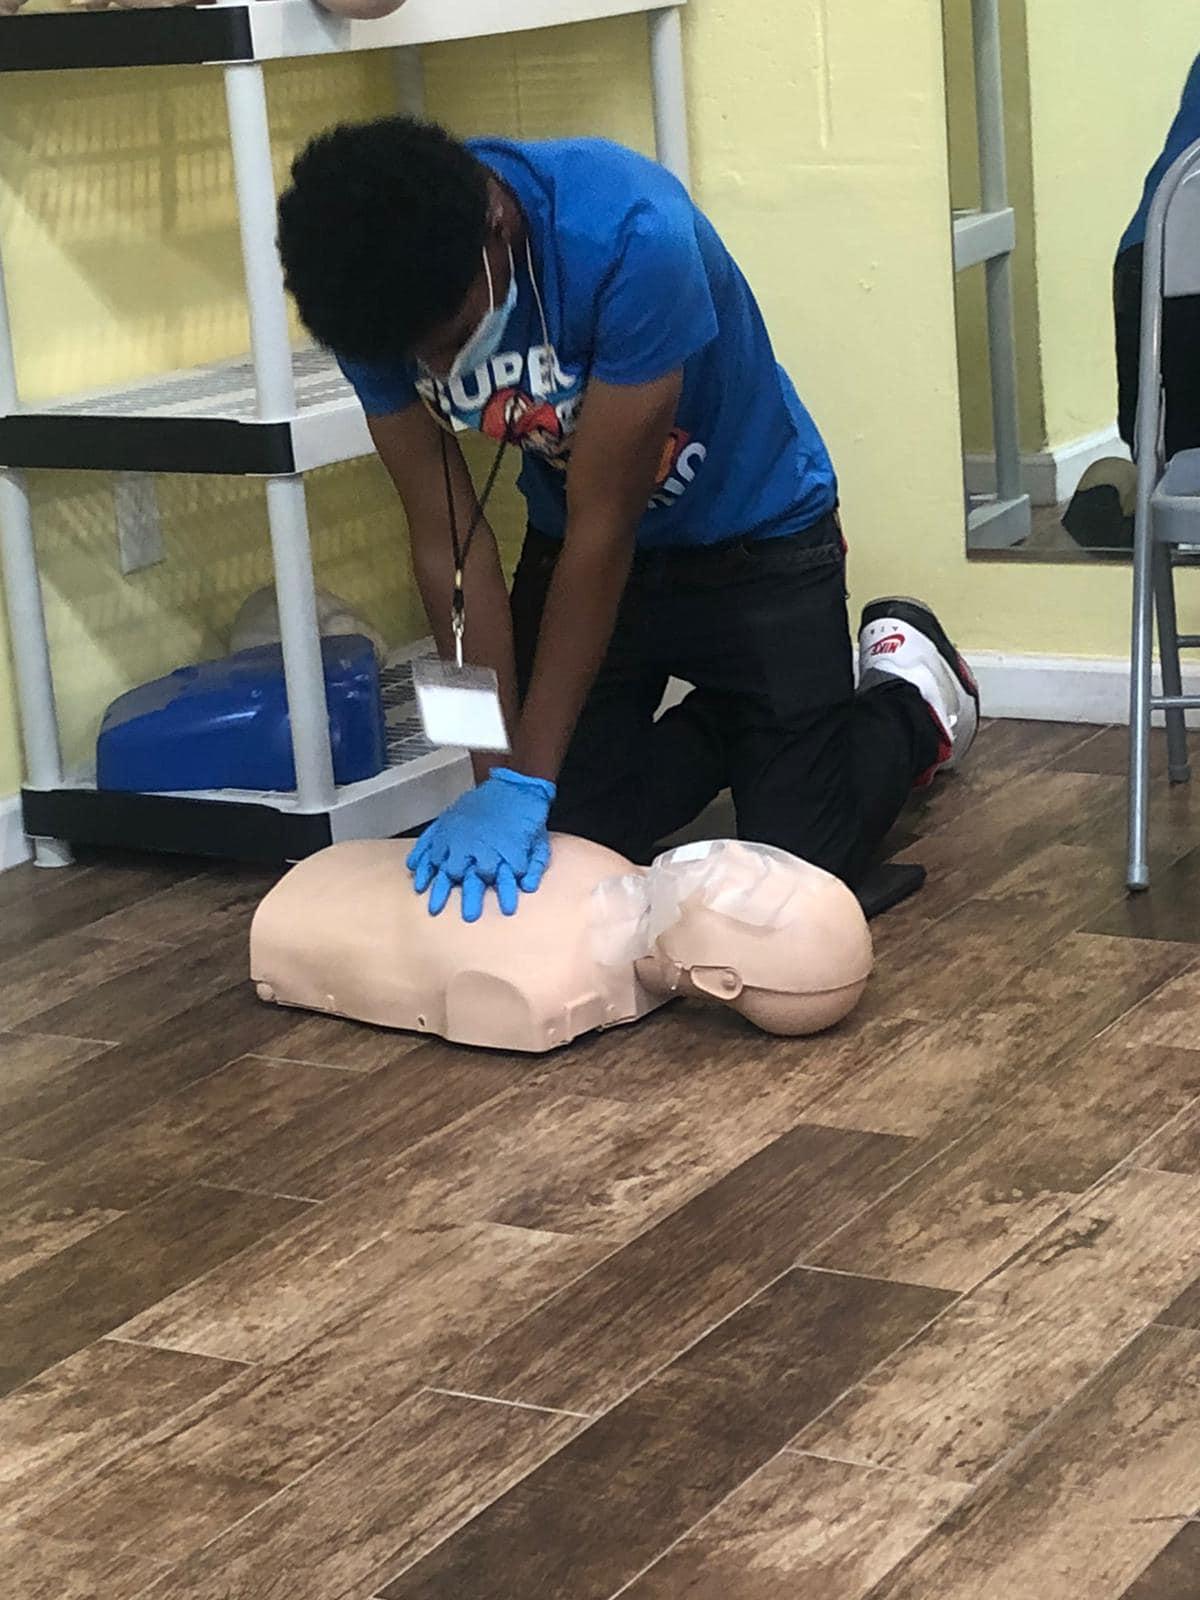 Take the SAFEST CLASS IN THE CITY! We go above and beyond to clean our facility and the material for each class to ensure the safety of our staff, students and community â¤ï¸ Sign up for our daily CPR classes today and get a FREE REUSABLE FACEMASK